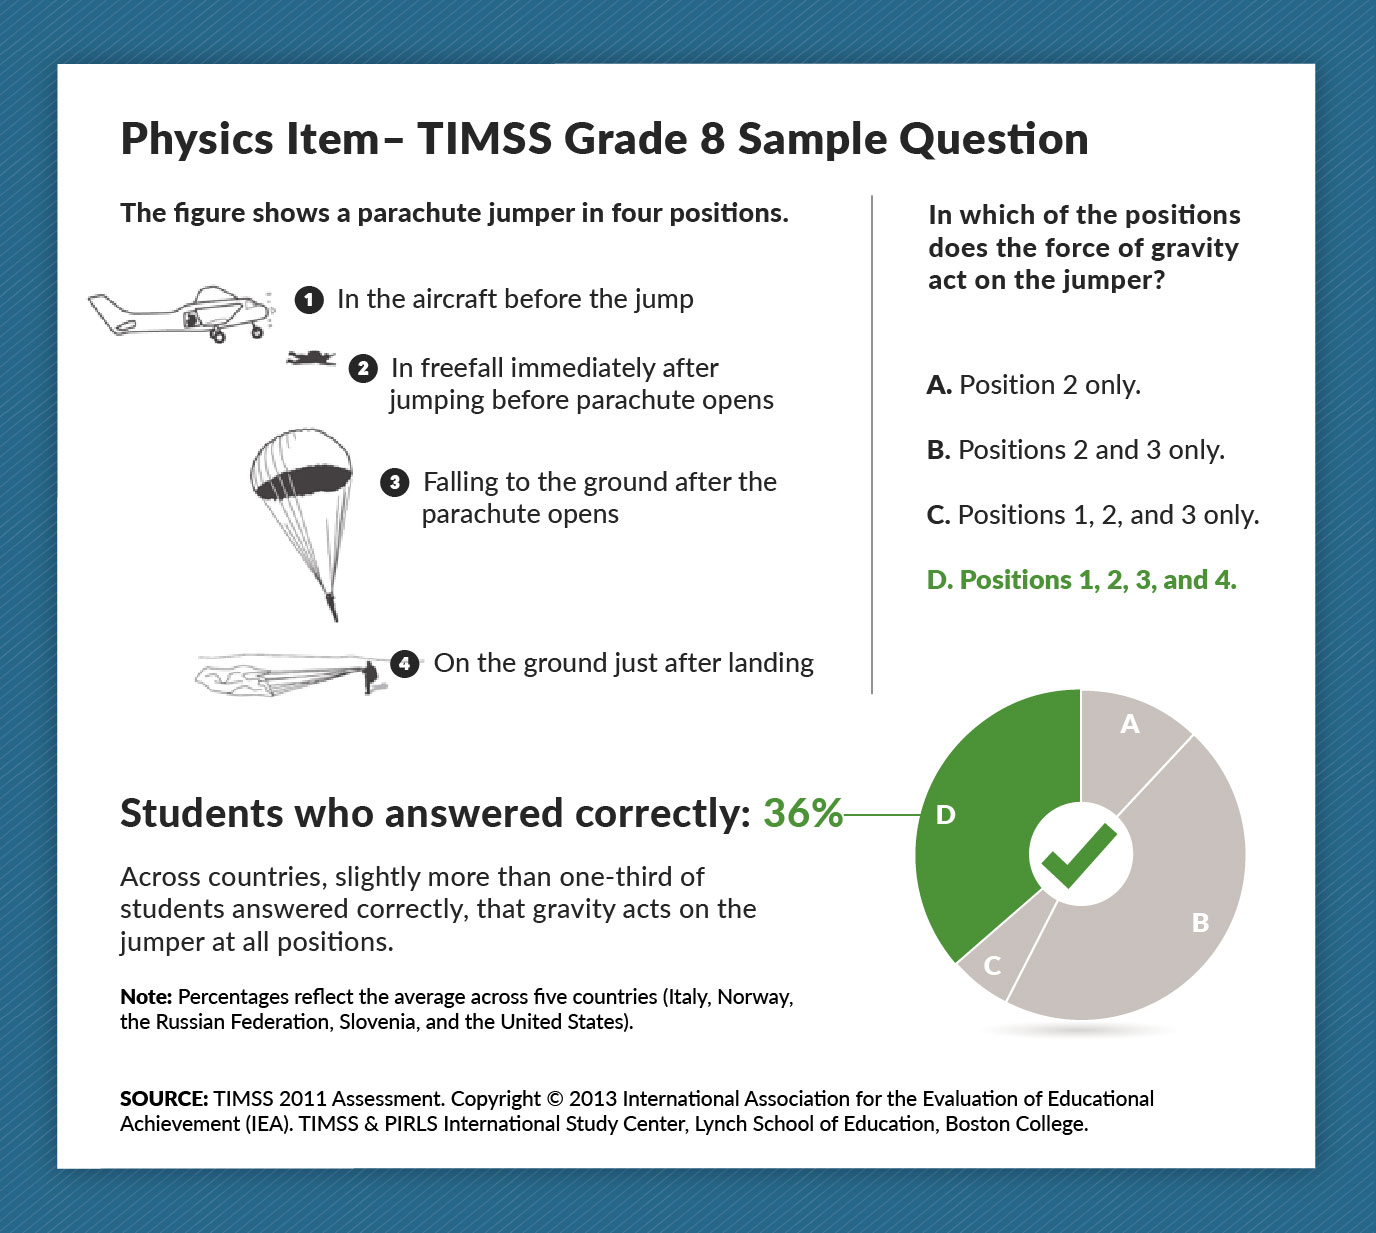 Graphic showing sample TIMSS physics question